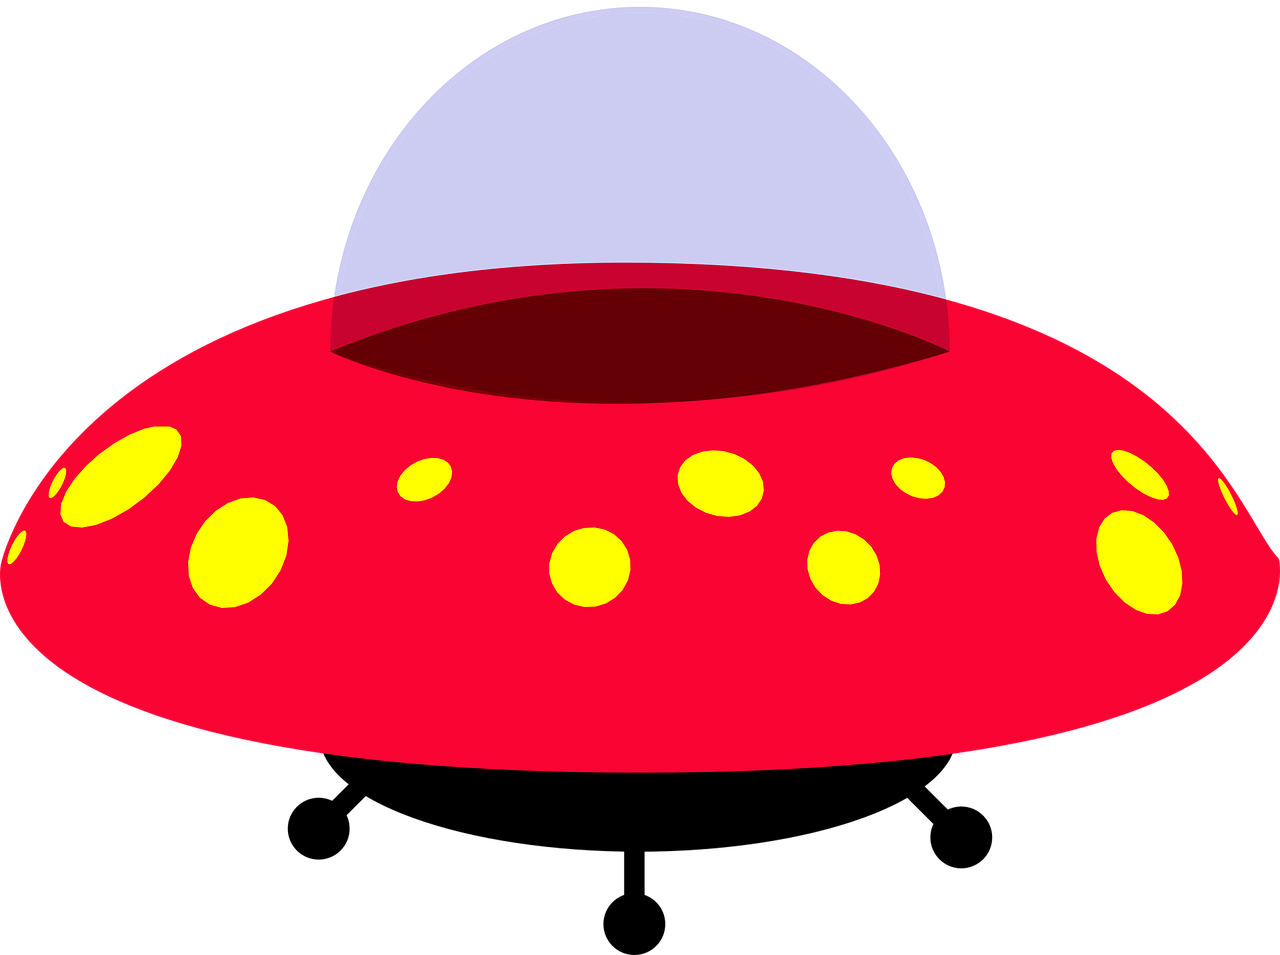 a red object with yellow spots on it, concept art, pop art, flying saucer, [ floating ]!!, clipart, in intergalactic japan